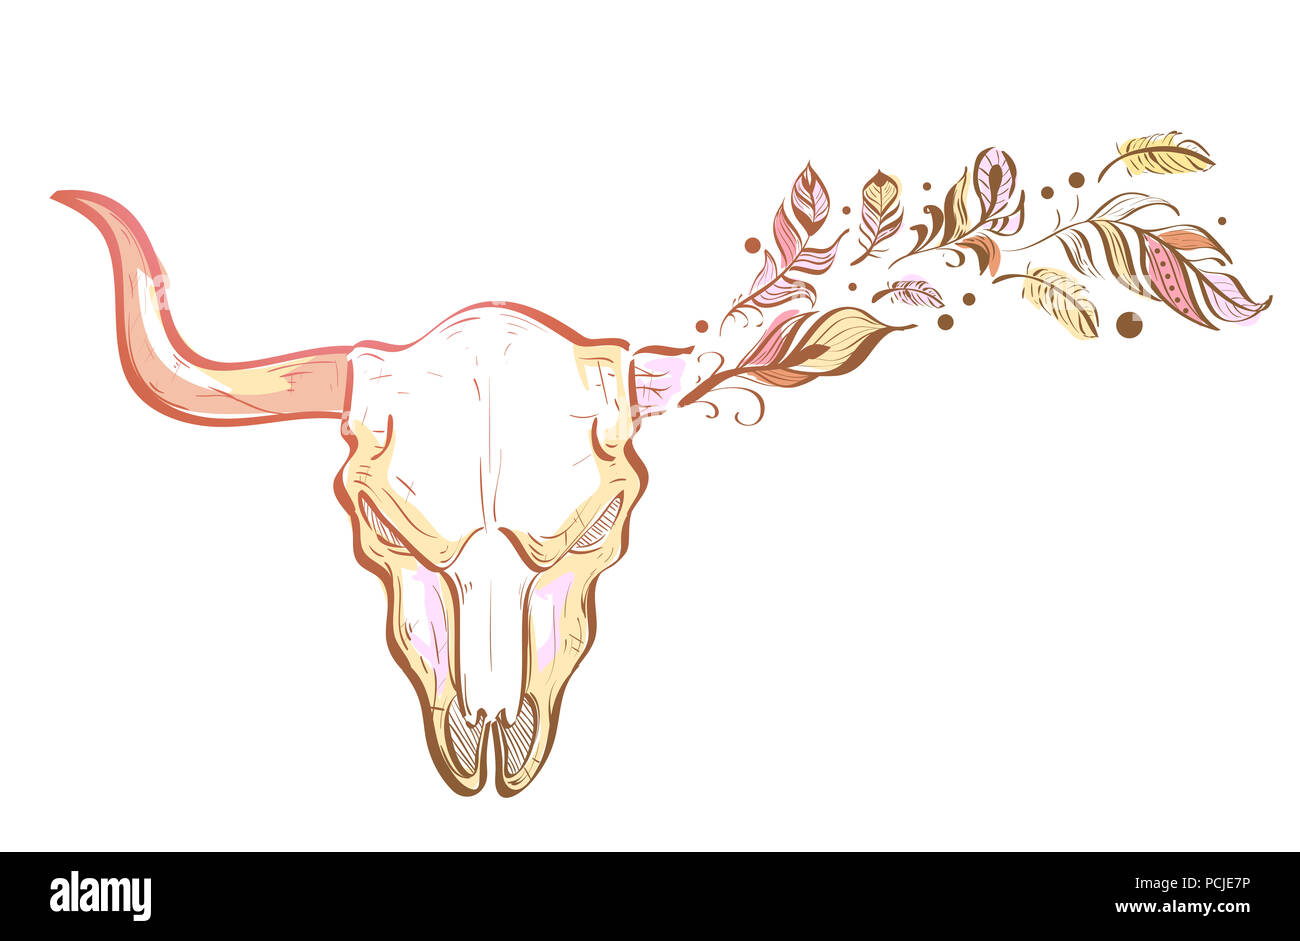 Illustration of a Bull Skull Boho Design with Feathers Flowing Stock Photo